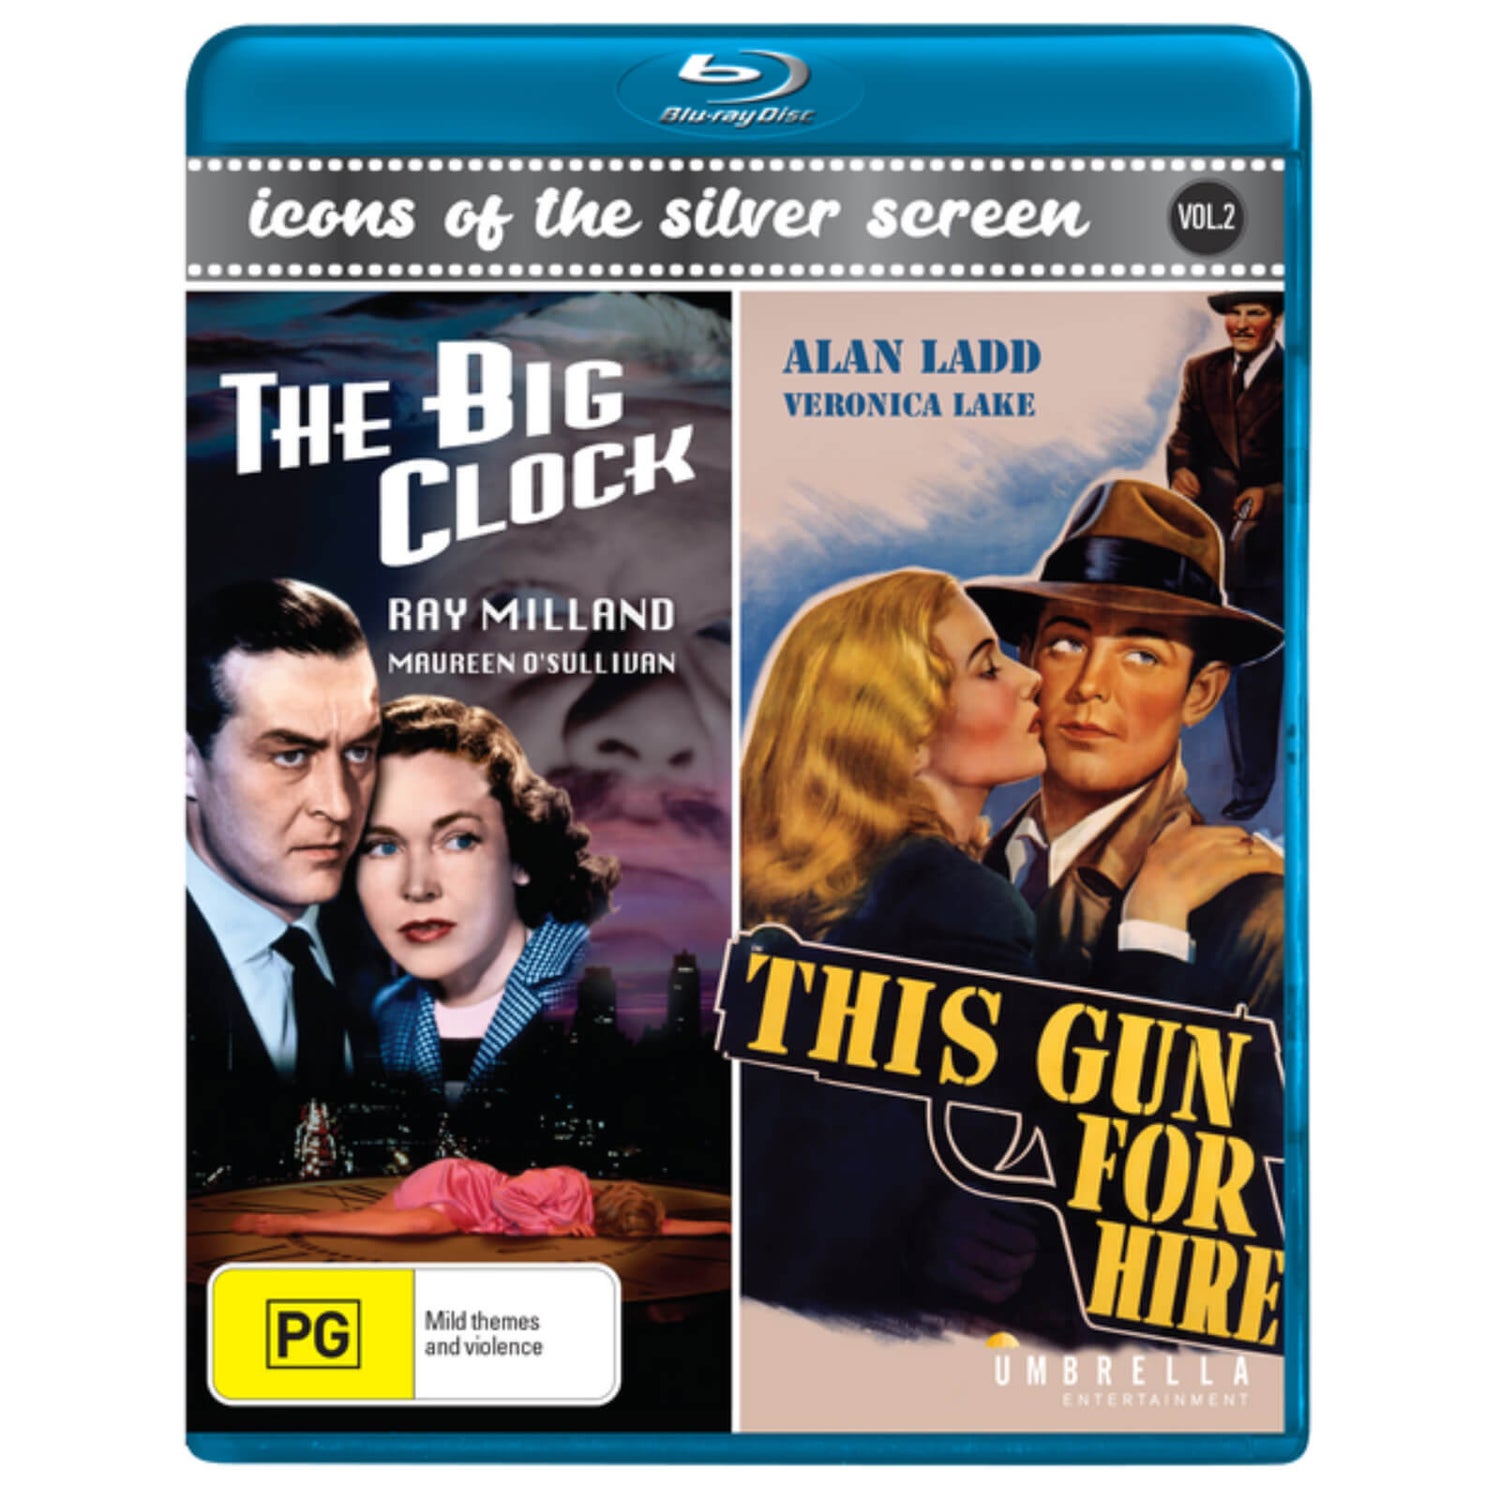 The Big Clock / This Gun For Hire (US Import)